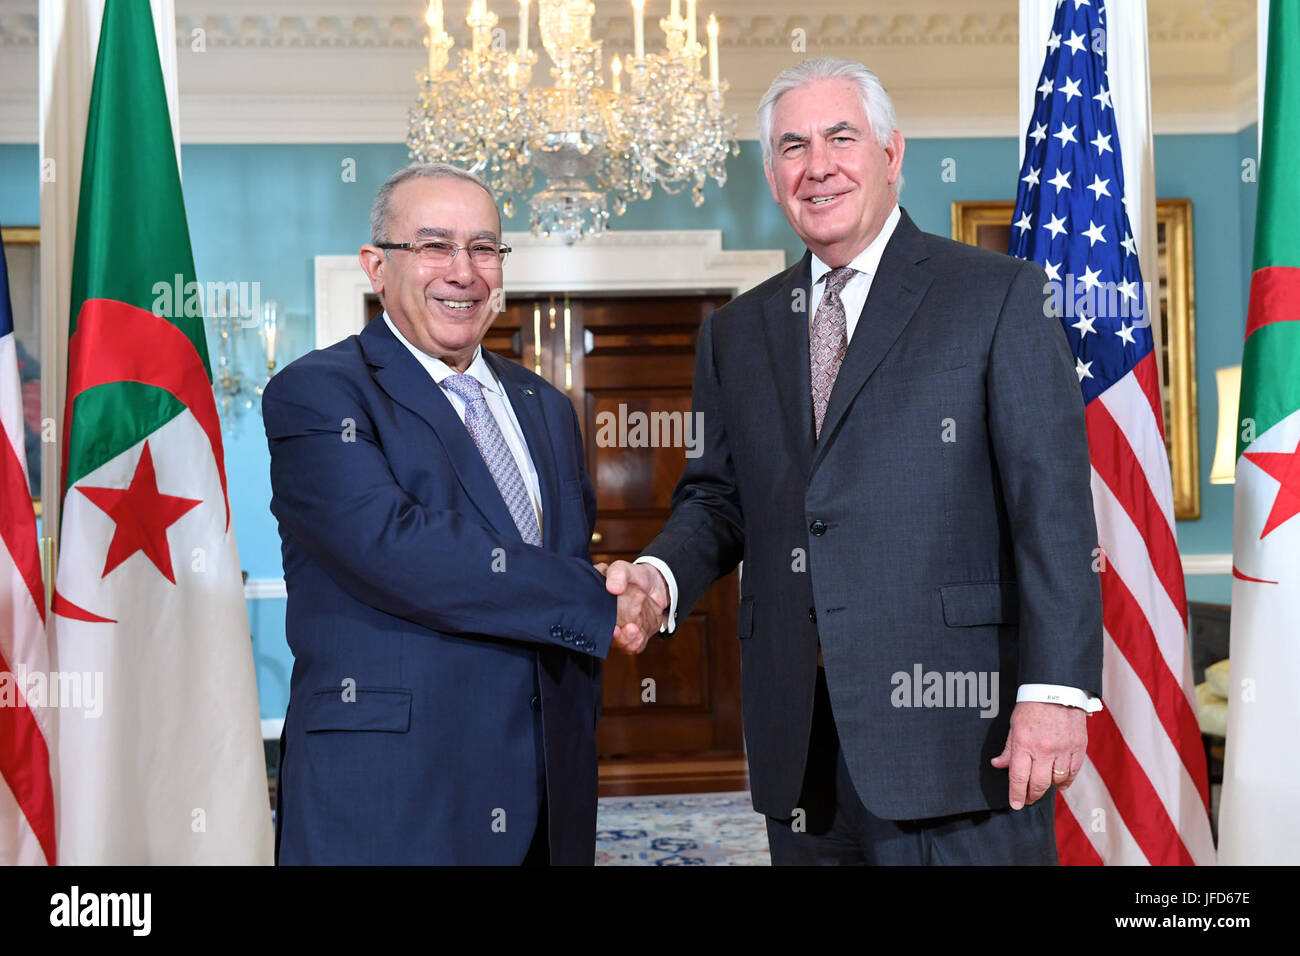 U.S. Secretary of State Rex Tillerson poses for a photo with Algerian Foreign Minister Ramtane Lamamra before their bilateral meeting at the U.S. Department of State in Washington, D.C., on May 17, 2017. Stock Photo